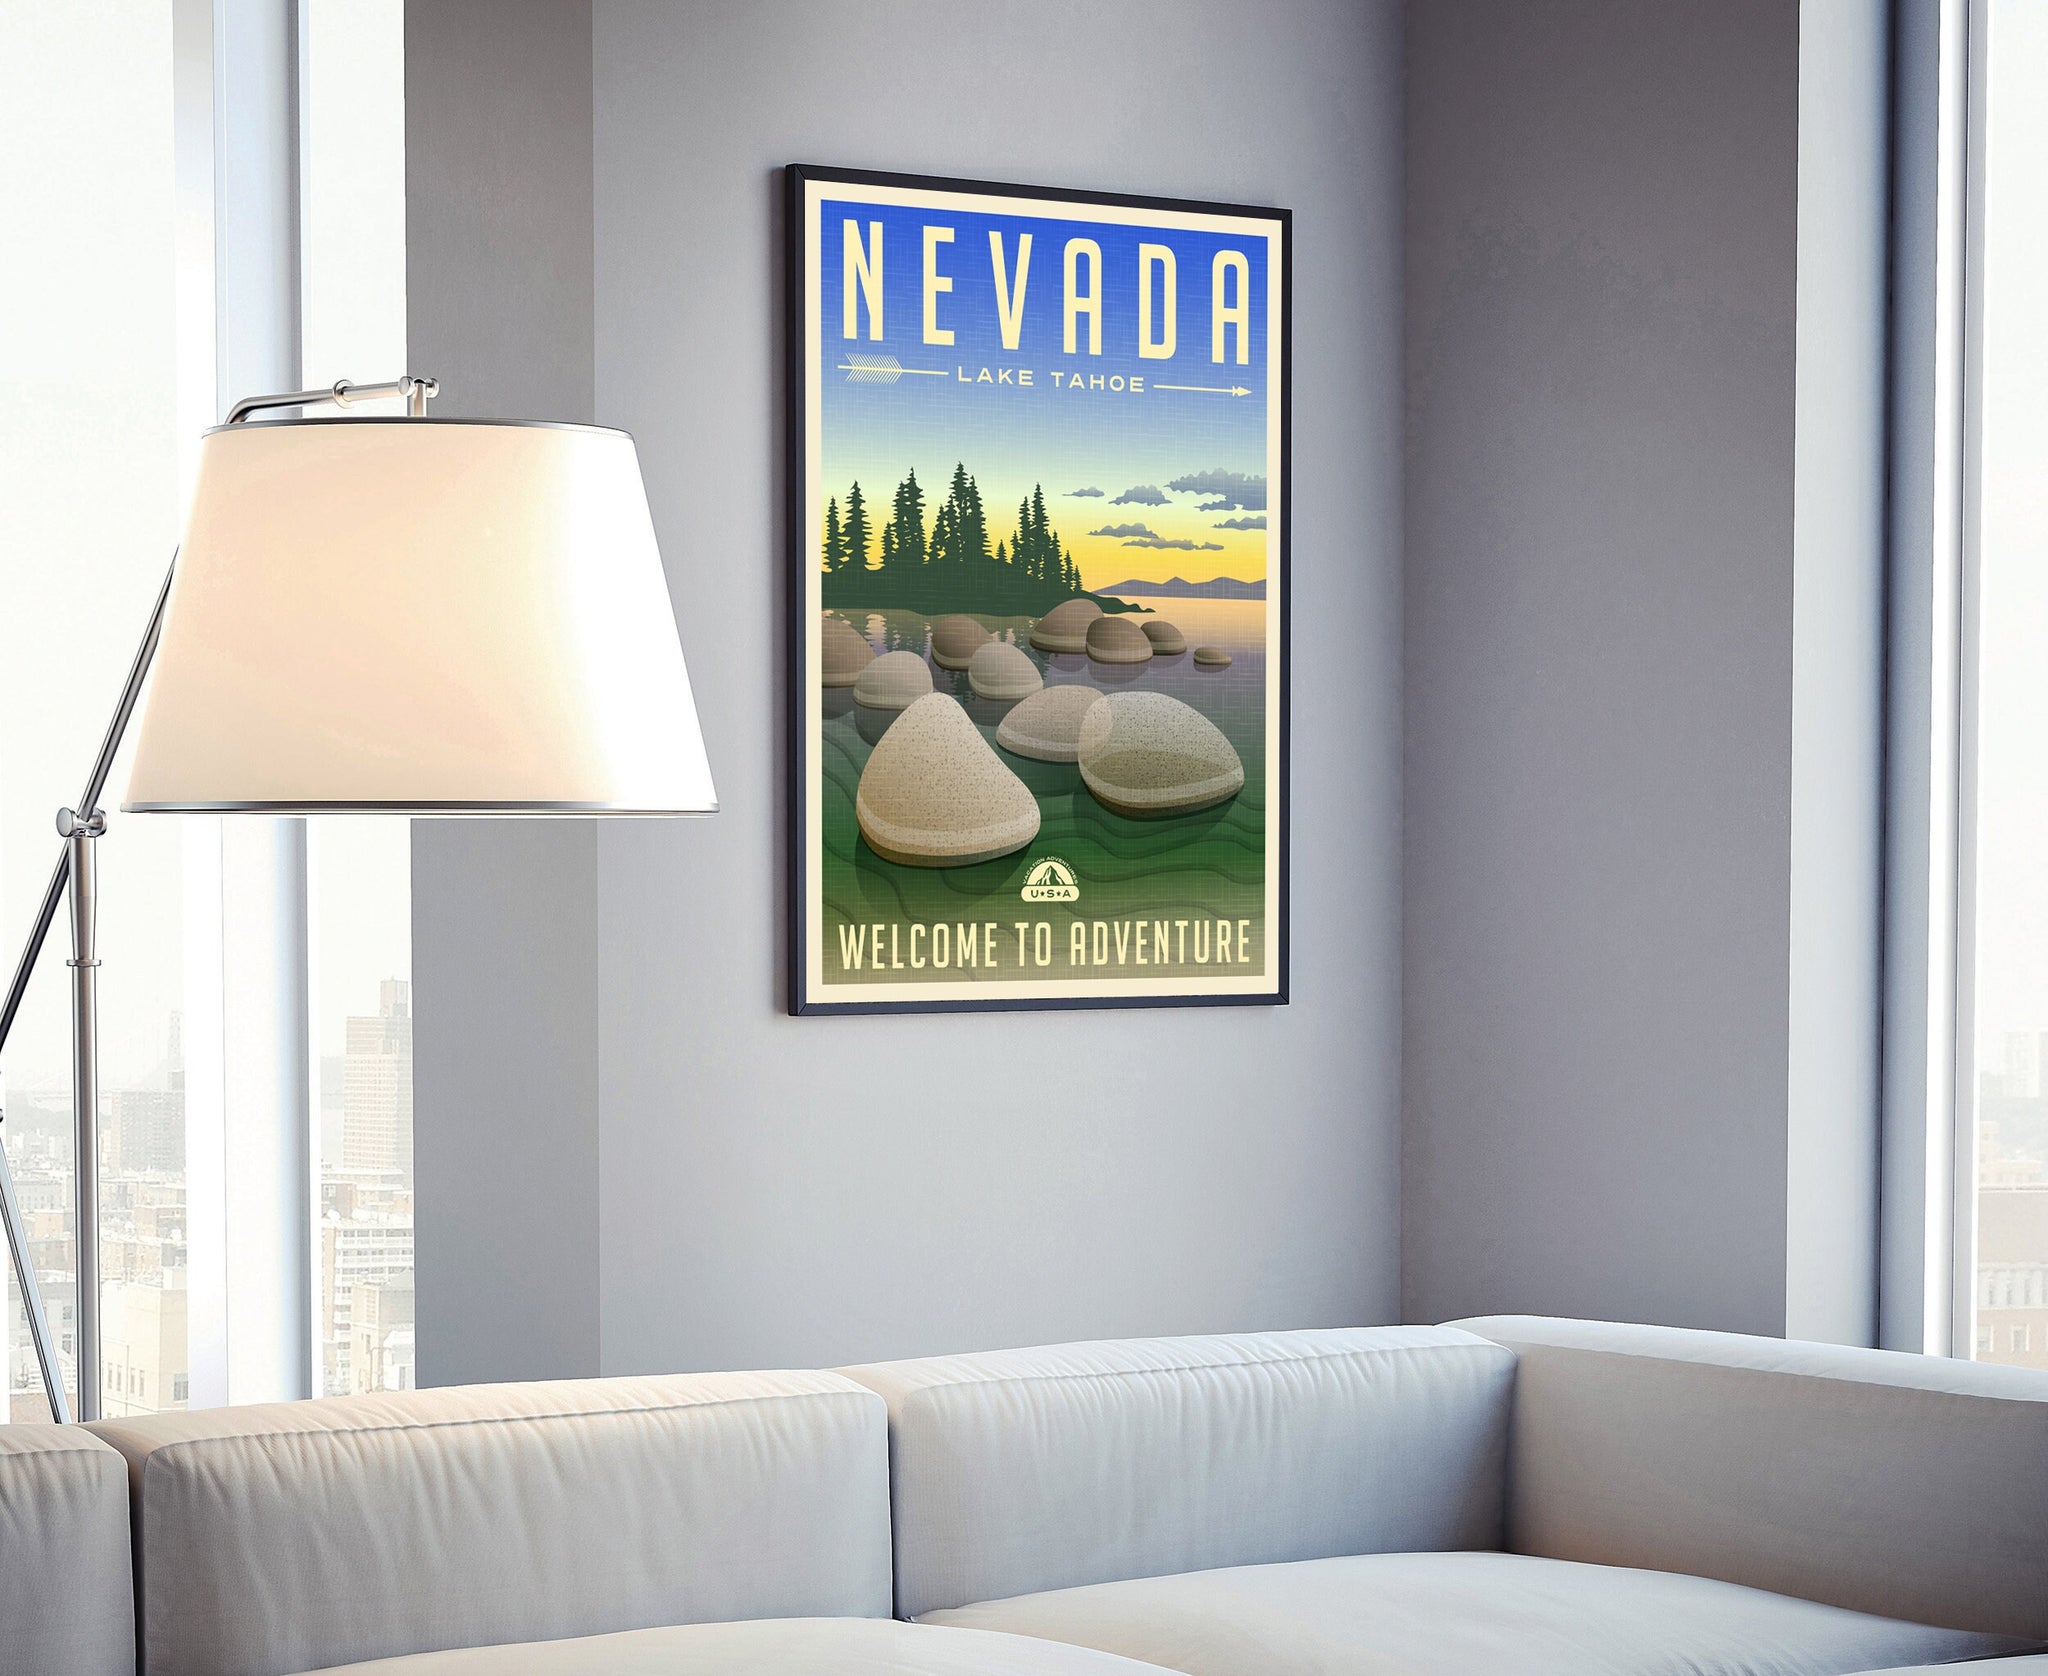 Nevada Vintage Rustic Poster Print, Retro Style Travel Poster